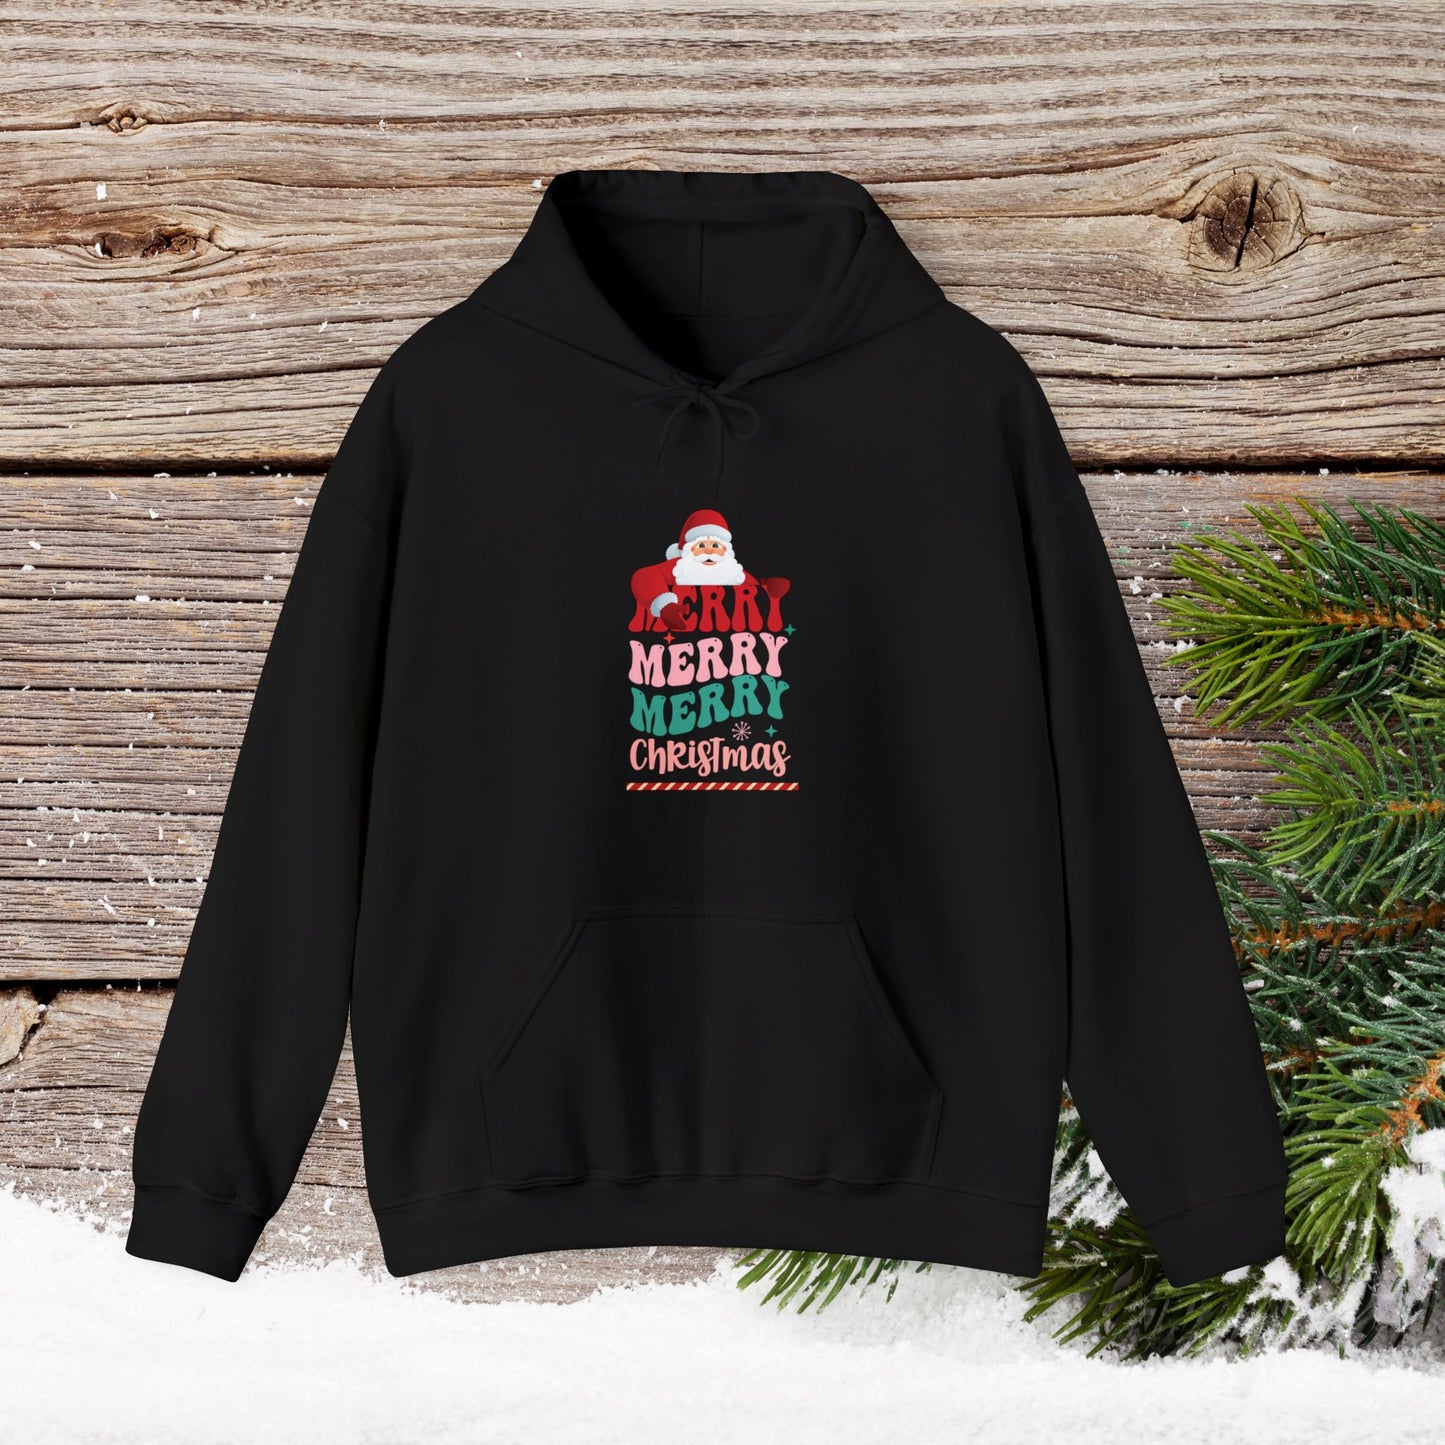 Christmas Hoodie - Merry Merry Merry Christmas - Cute Christmas Shirts - Youth and Adult Christmas Hooded Sweatshirt Hooded Sweatshirt Graphic Avenue Black Adult Small 